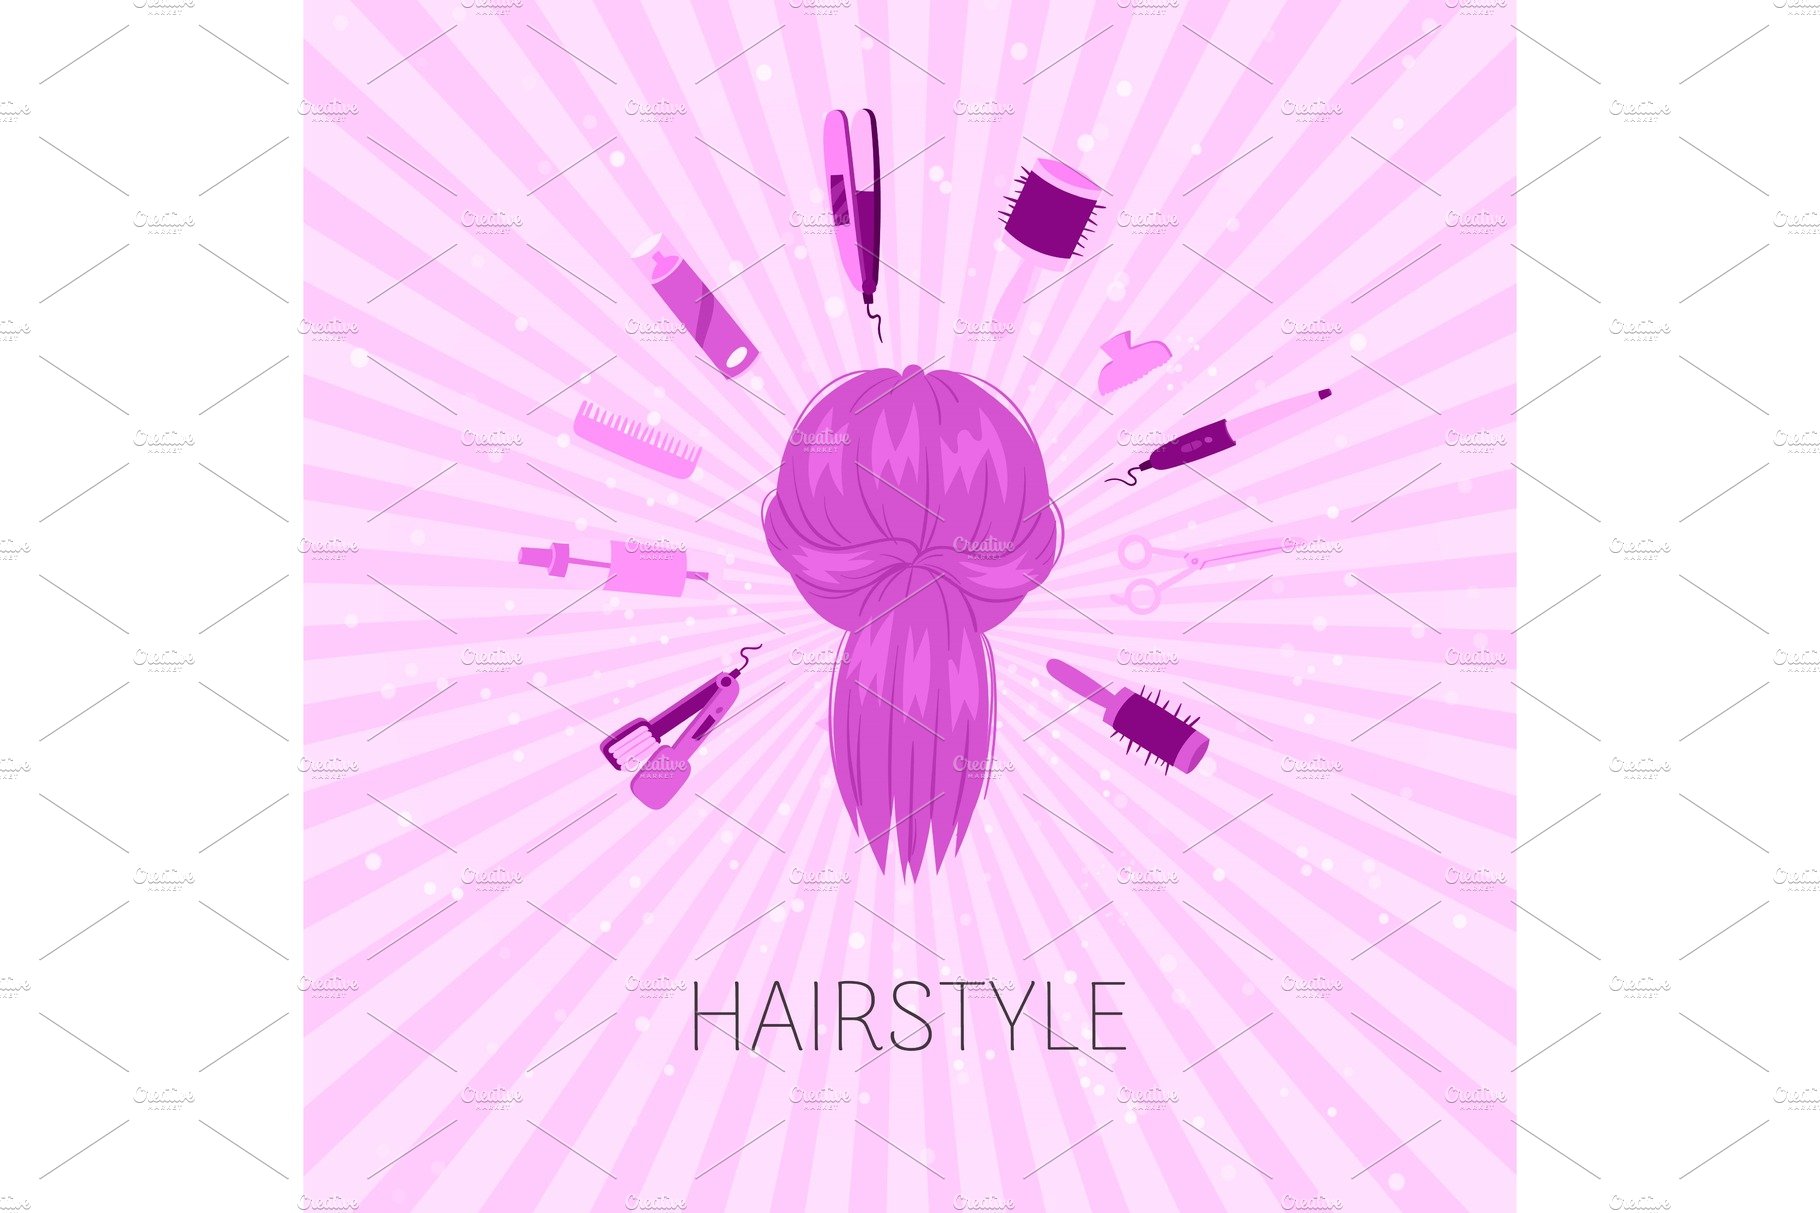 Hairstyle salon, beauty studio cover image.